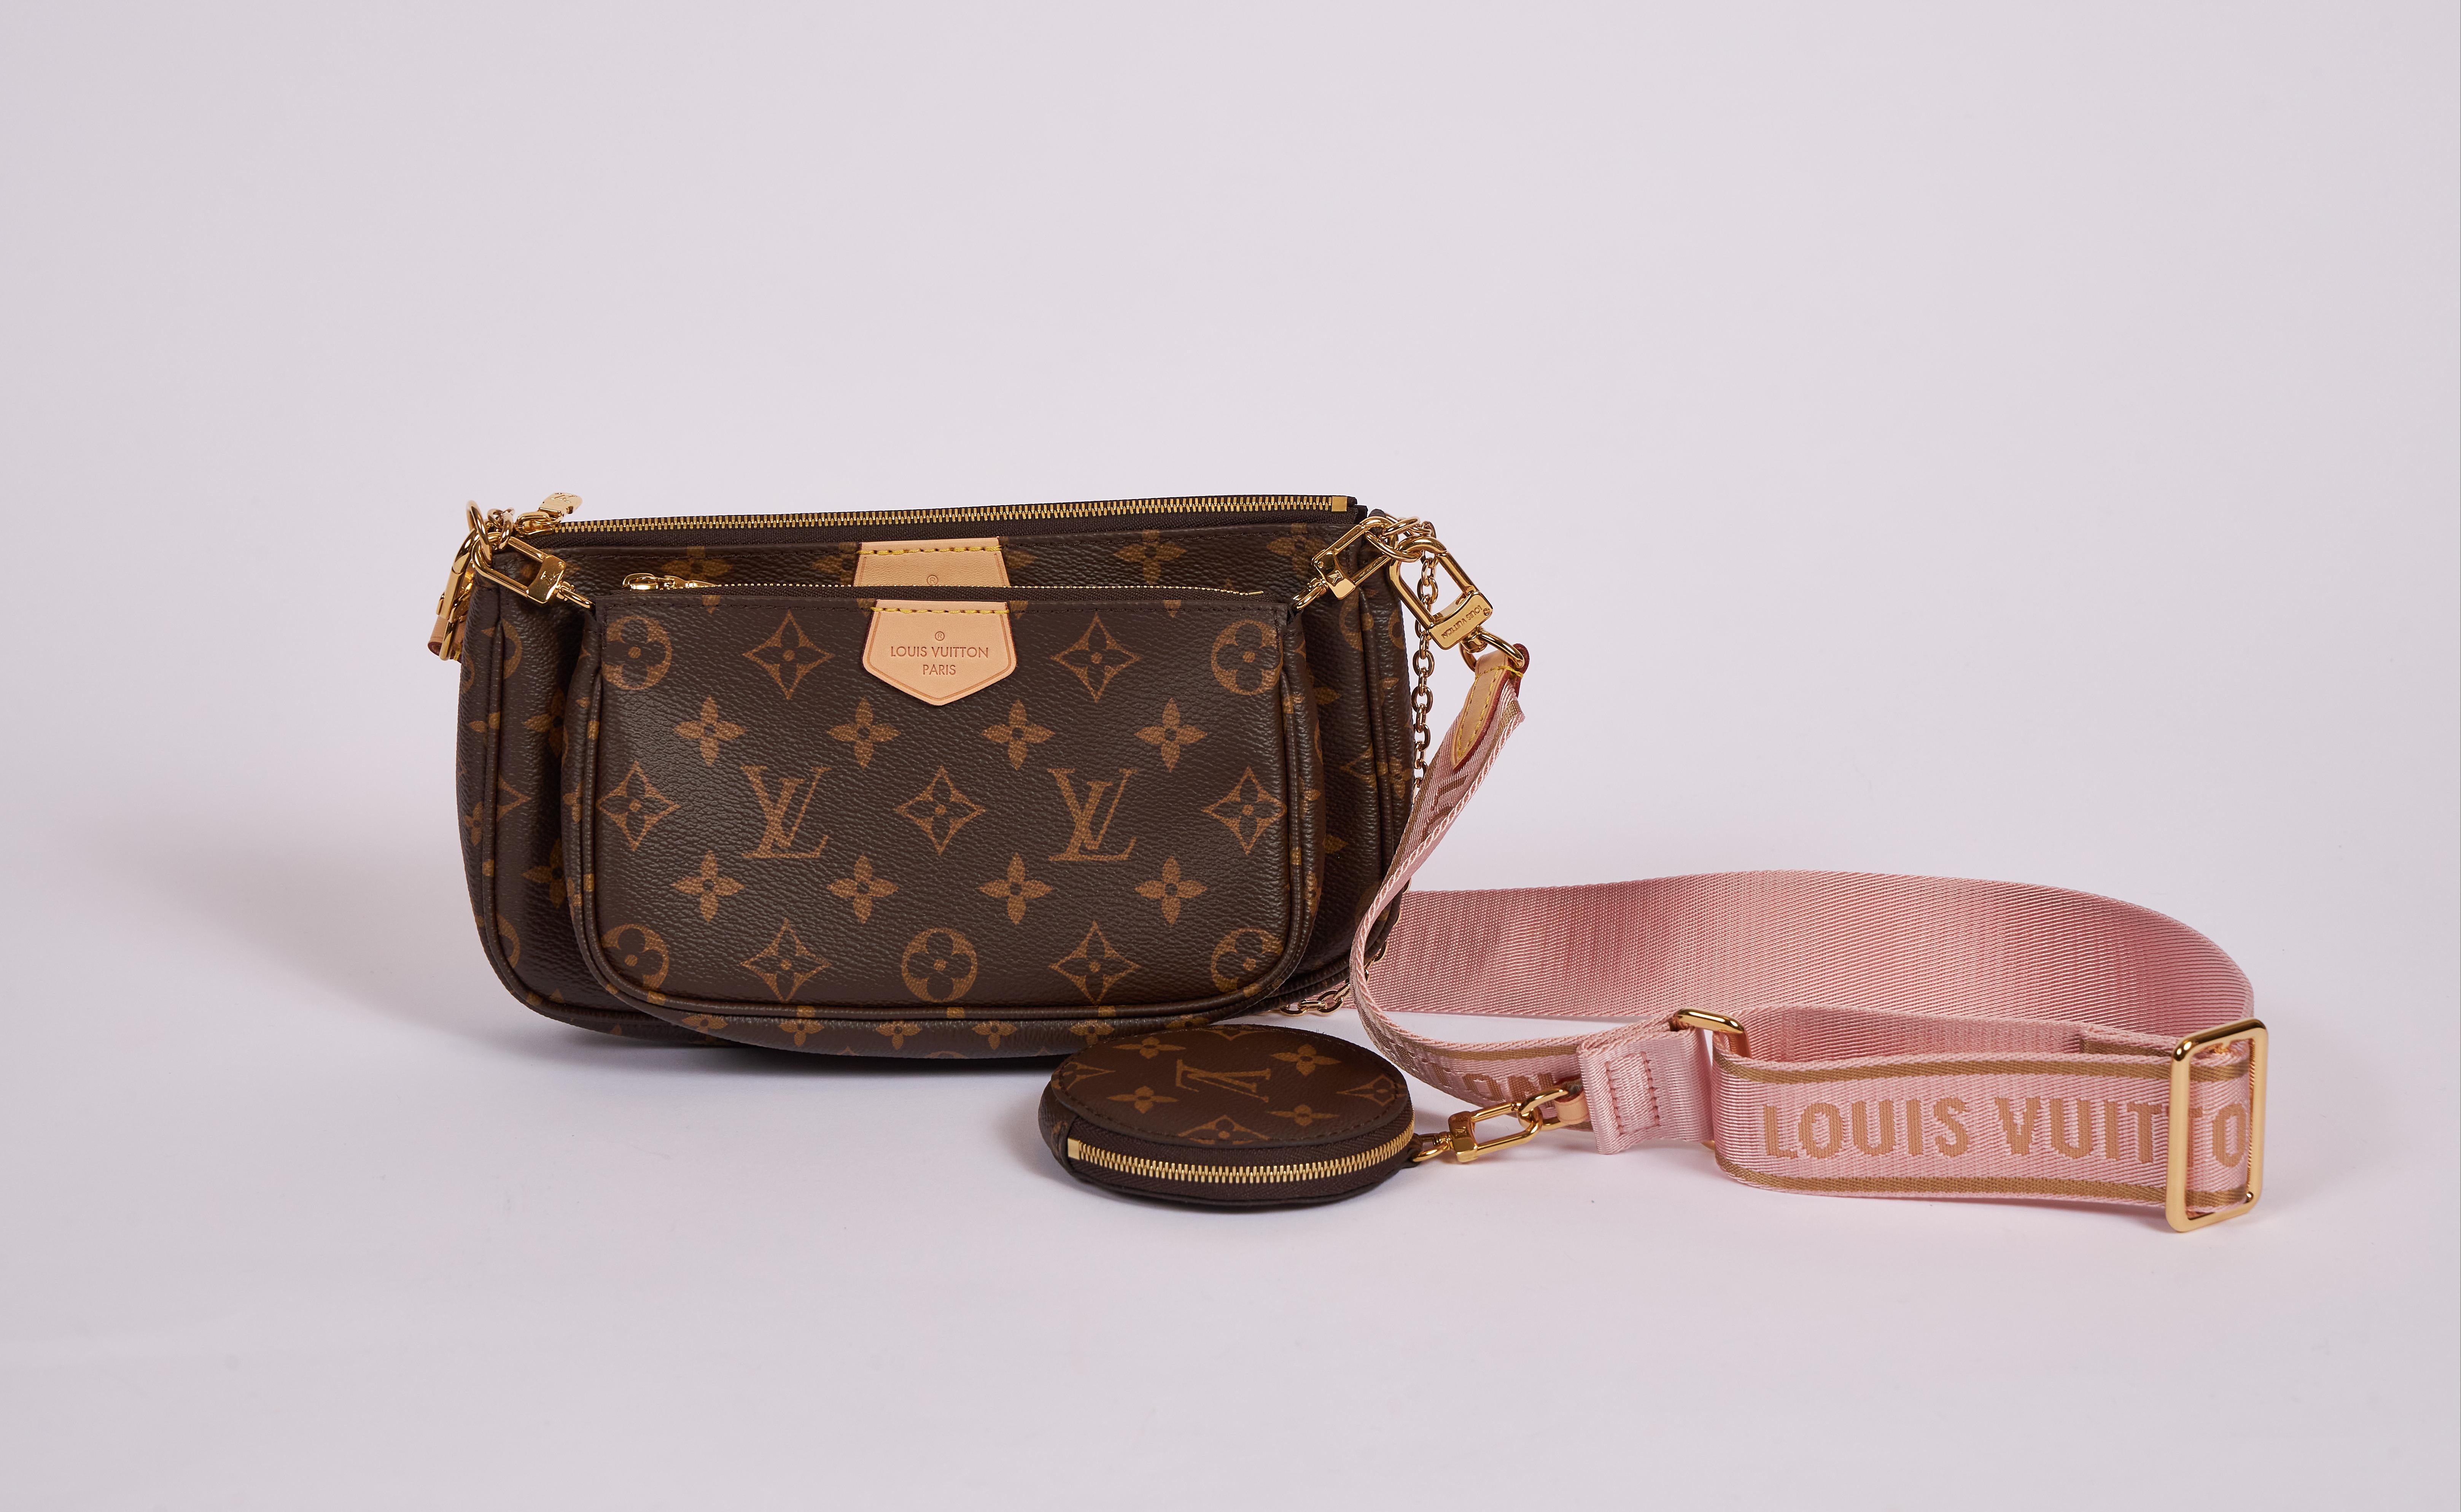 Vuitton hot season ticket multi pouches in coated monogram canvas and pink detail. Sold out worldwide . Composed of three detachable parts : cross body, pochette and round coin purse. Adjustable strap. Comes with dust cover and original box.